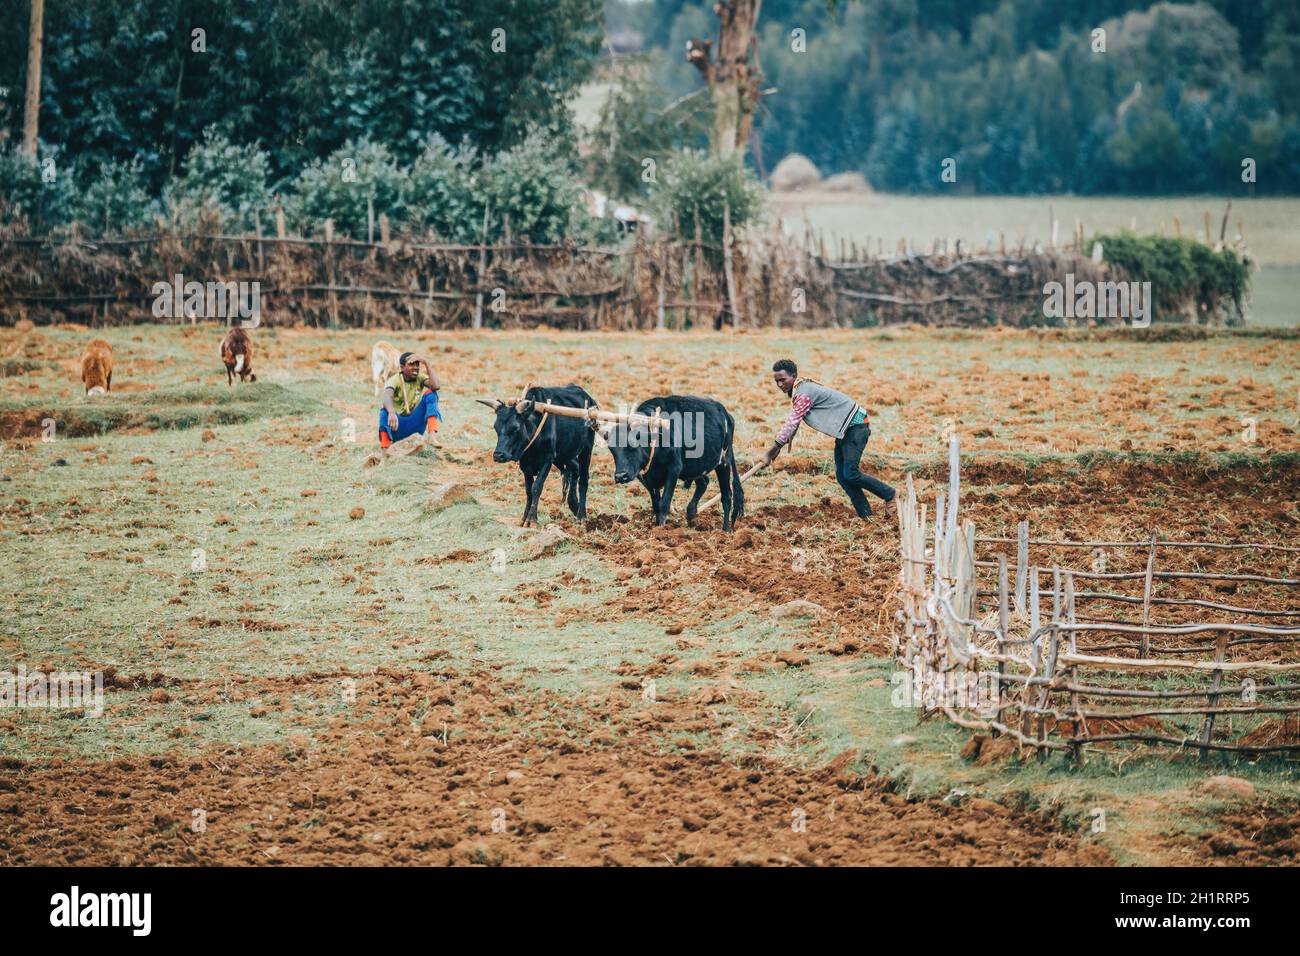 OROMIA REGION, ETHIOPIA, APRIL 19.2019, Unknown Ethiopian farmer cultivates a field with a traditional primitive wooden plow pulled by cows on April 1 Stock Photo